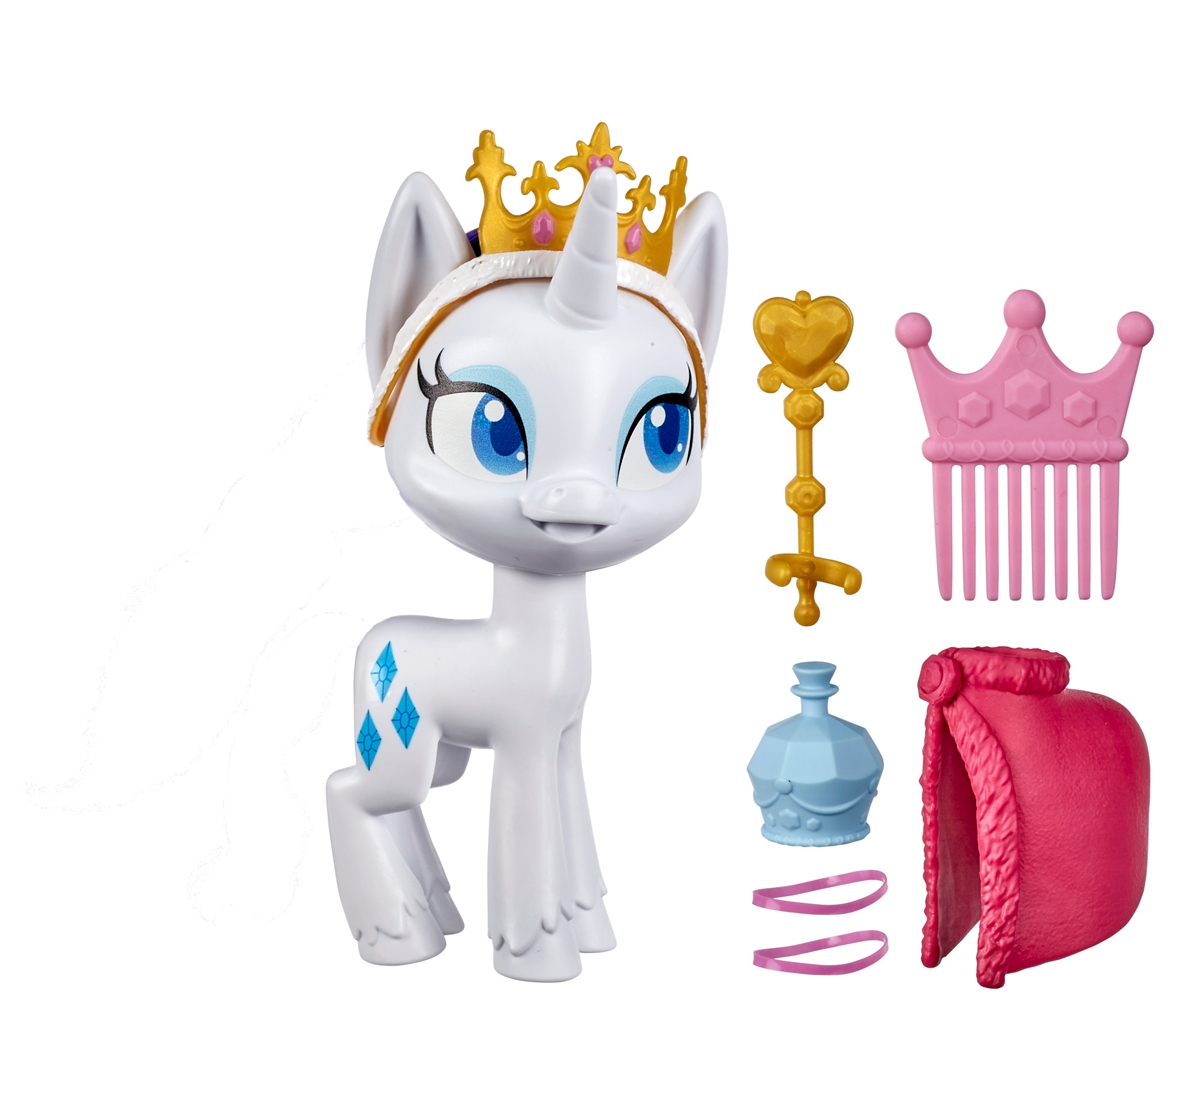 My Little Pony | My Little Pony Rarity Potion Dress Up Figure 5 Inch White Pony Toy with DressUp Fashion Accessories Brushable Hair and Comb Multicolor 3Y+